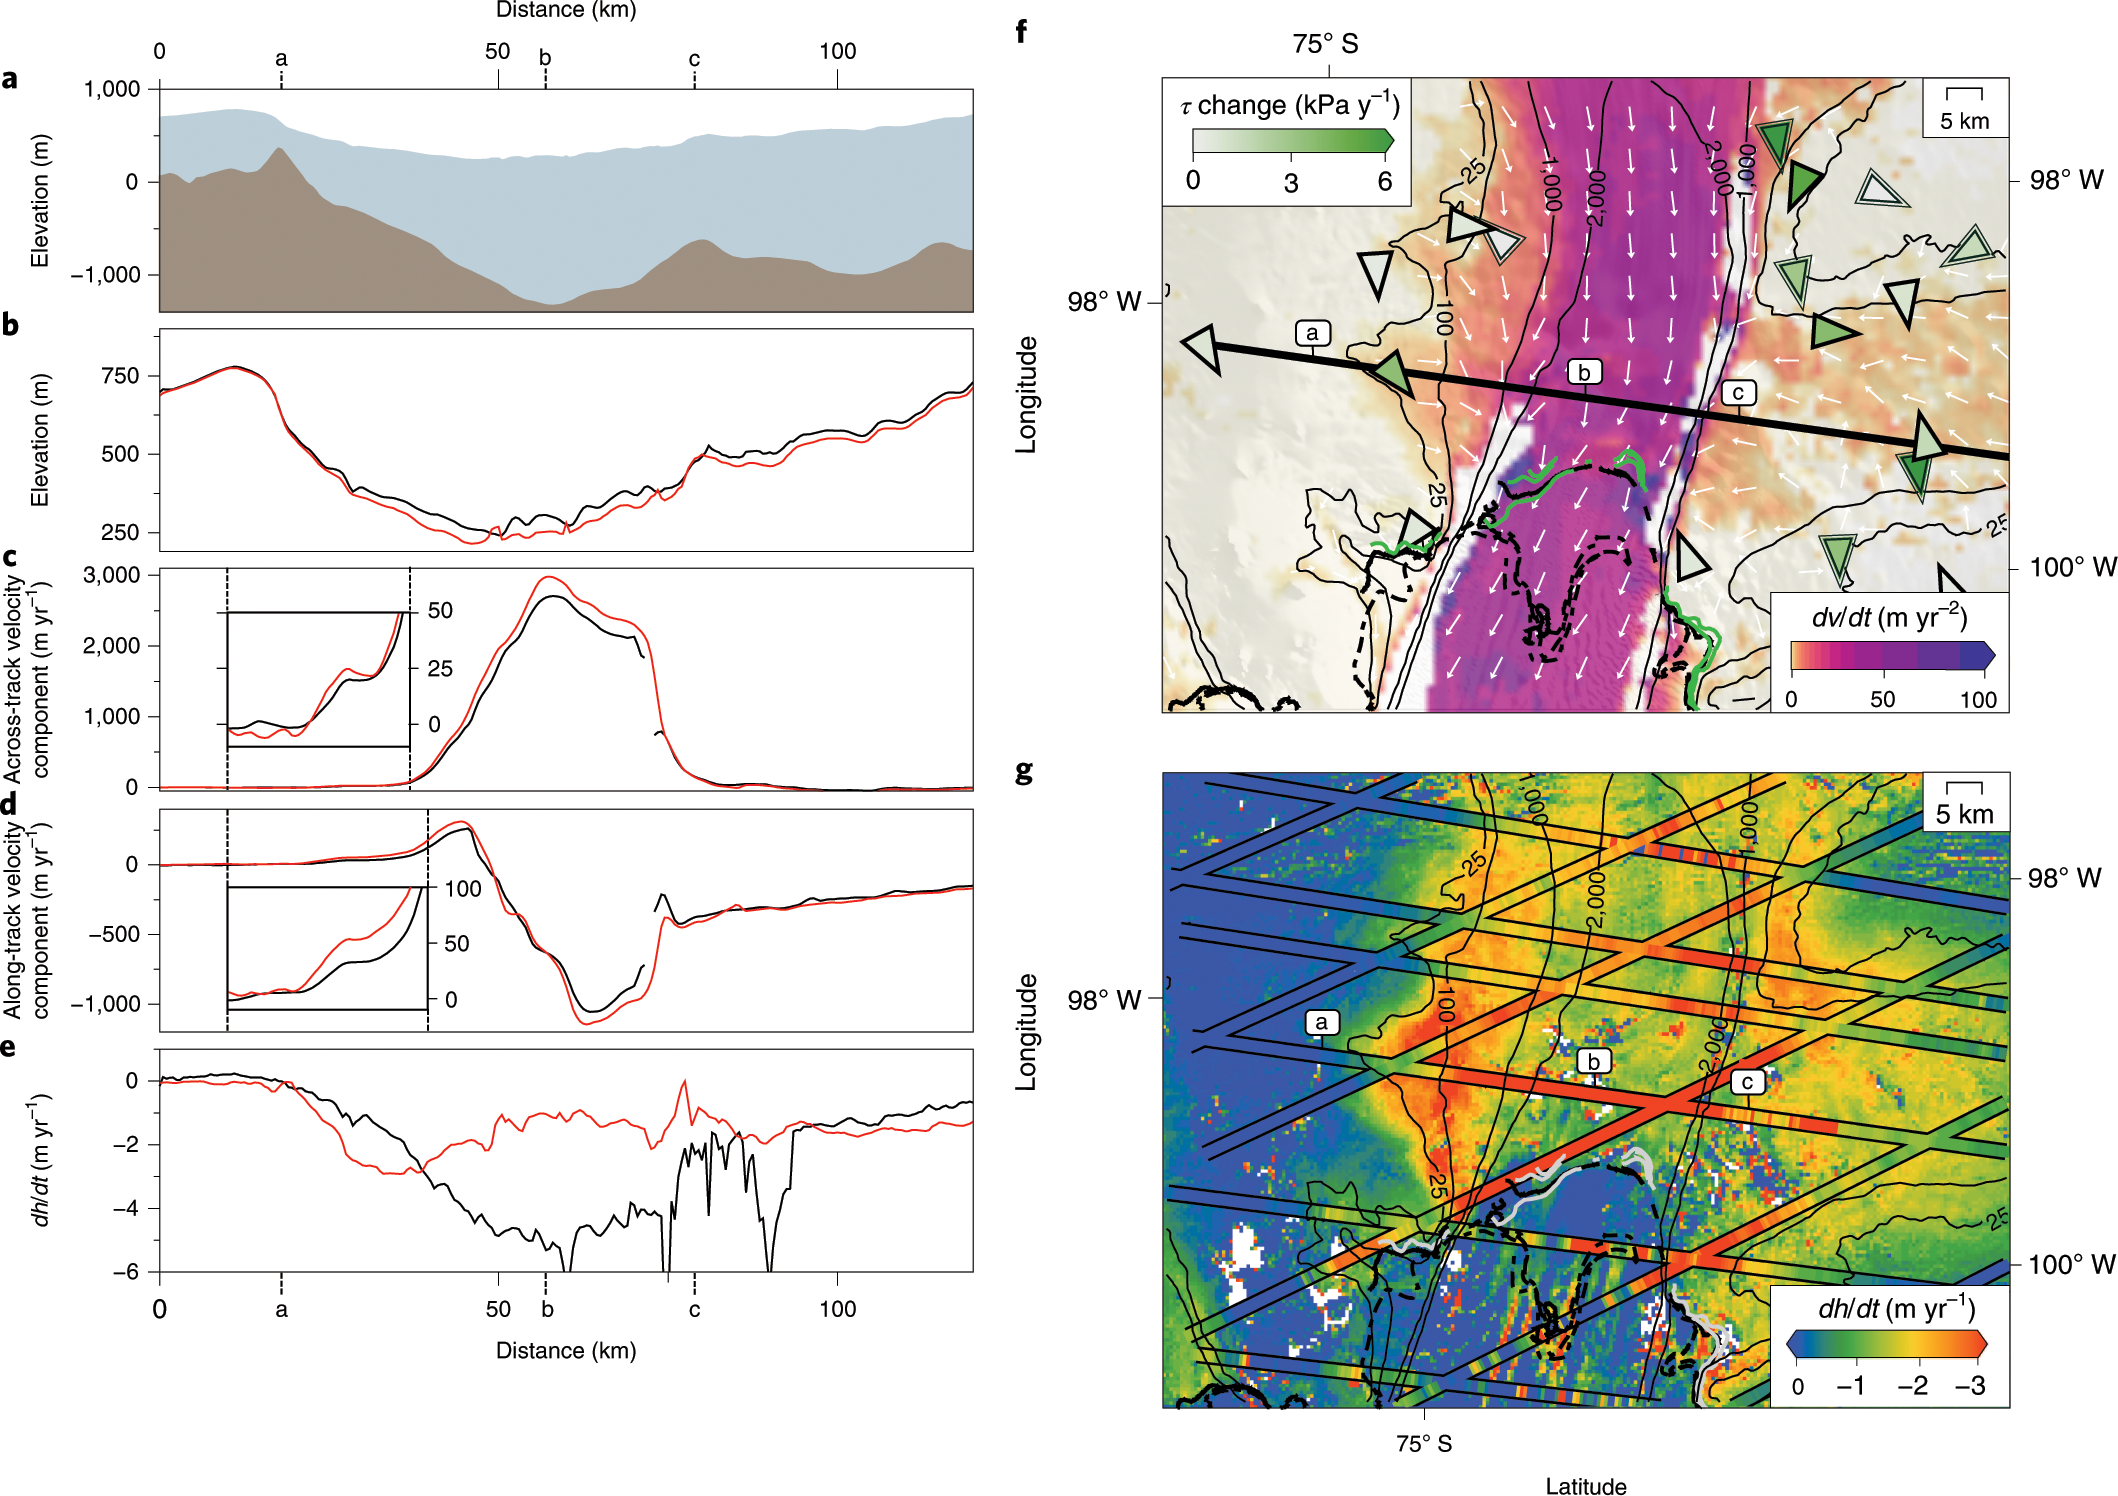 Complex evolving patterns of mass loss from Antarctica's largest glacier | Geoscience